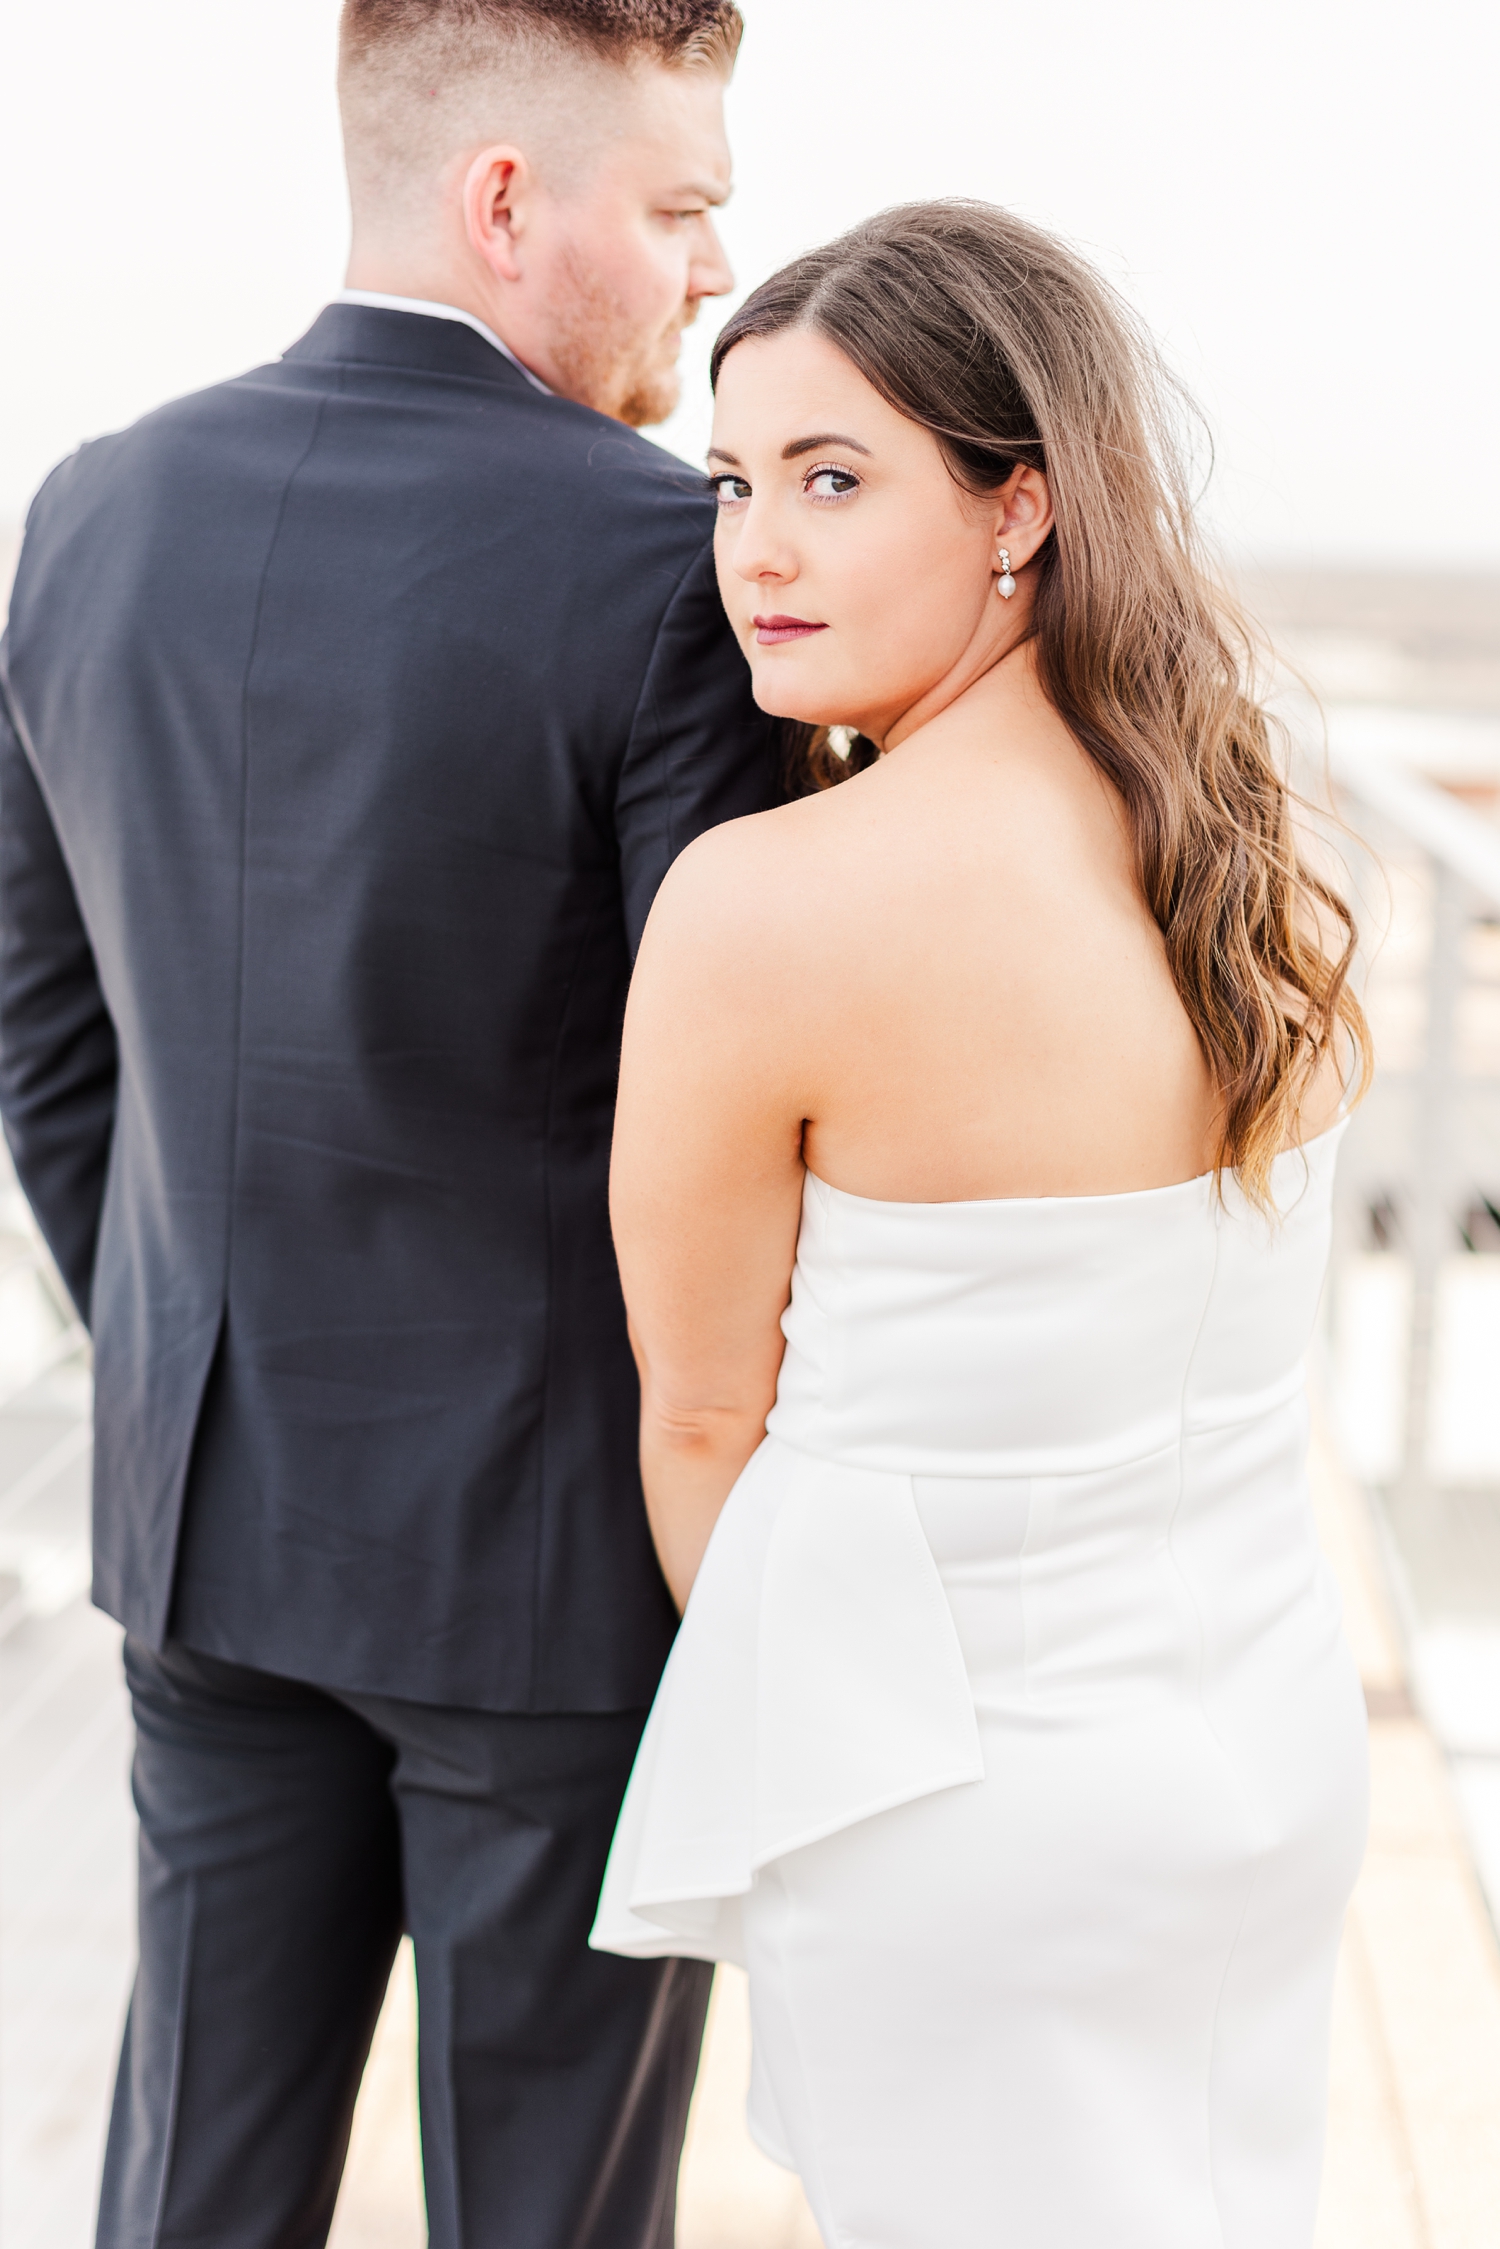 Jenna leans into Dustin's shoulder as she looks over her shoulder into the camera The Equitable Building in Des Moines, IA | CB Studio